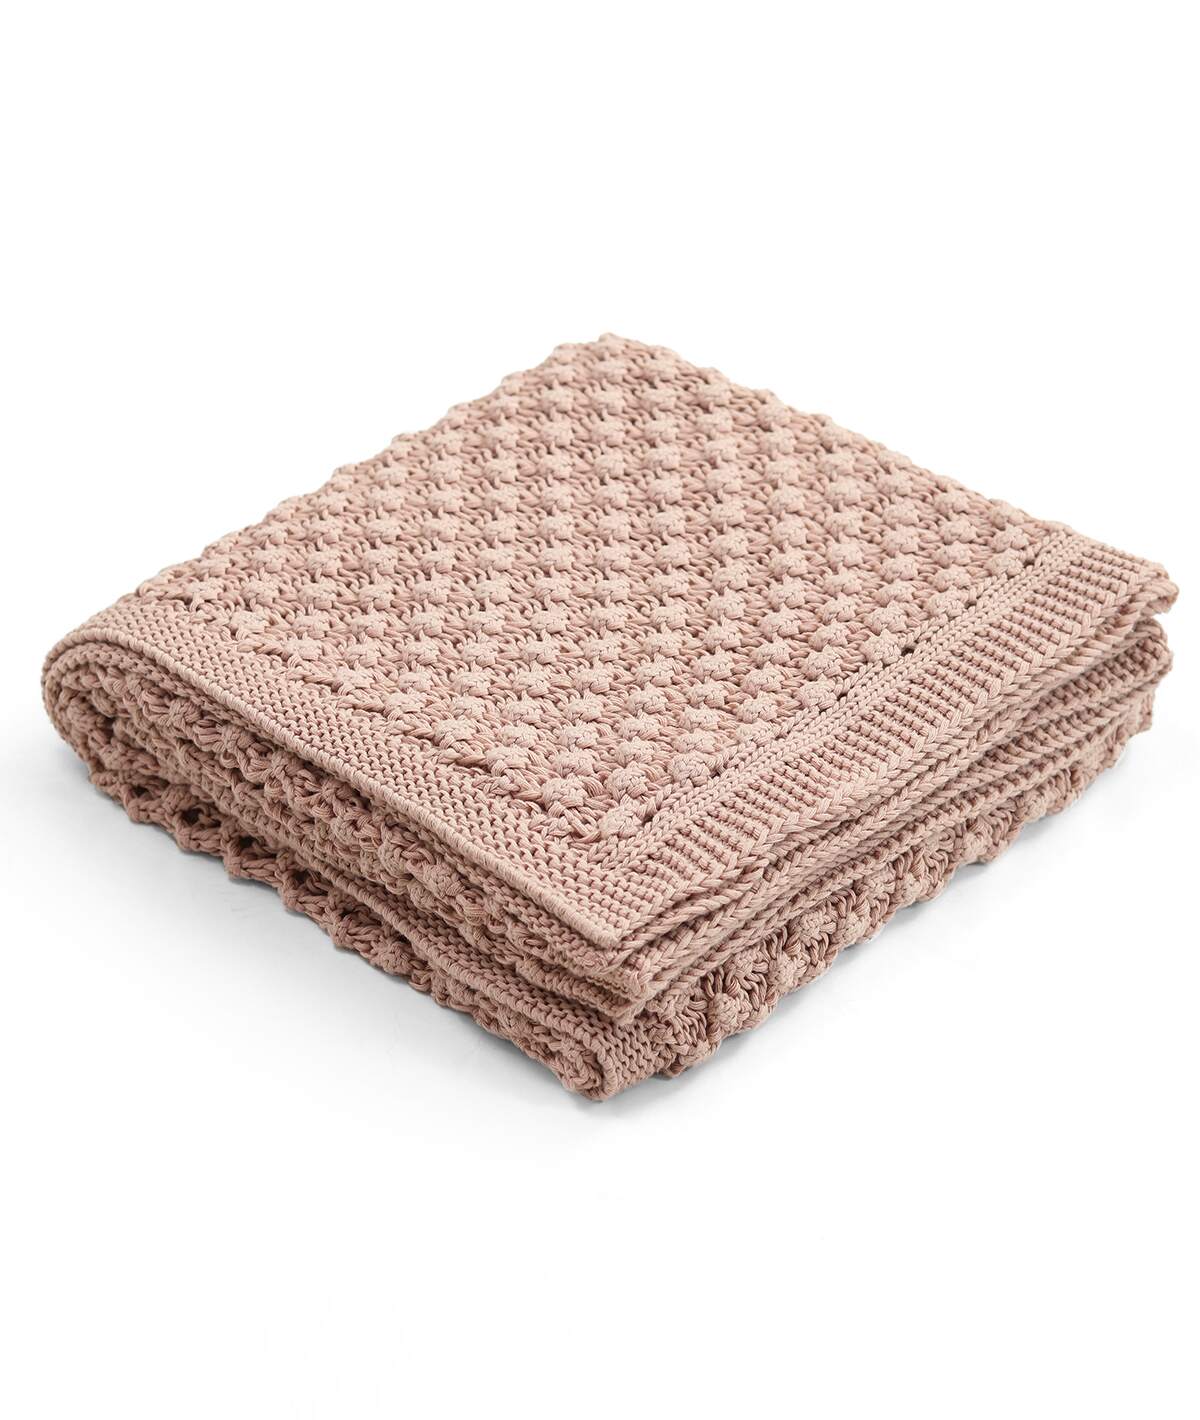 Popcorn Knit Cameo Pink Color Cotton Knitted Throw /Blanket  For Round The Year Use